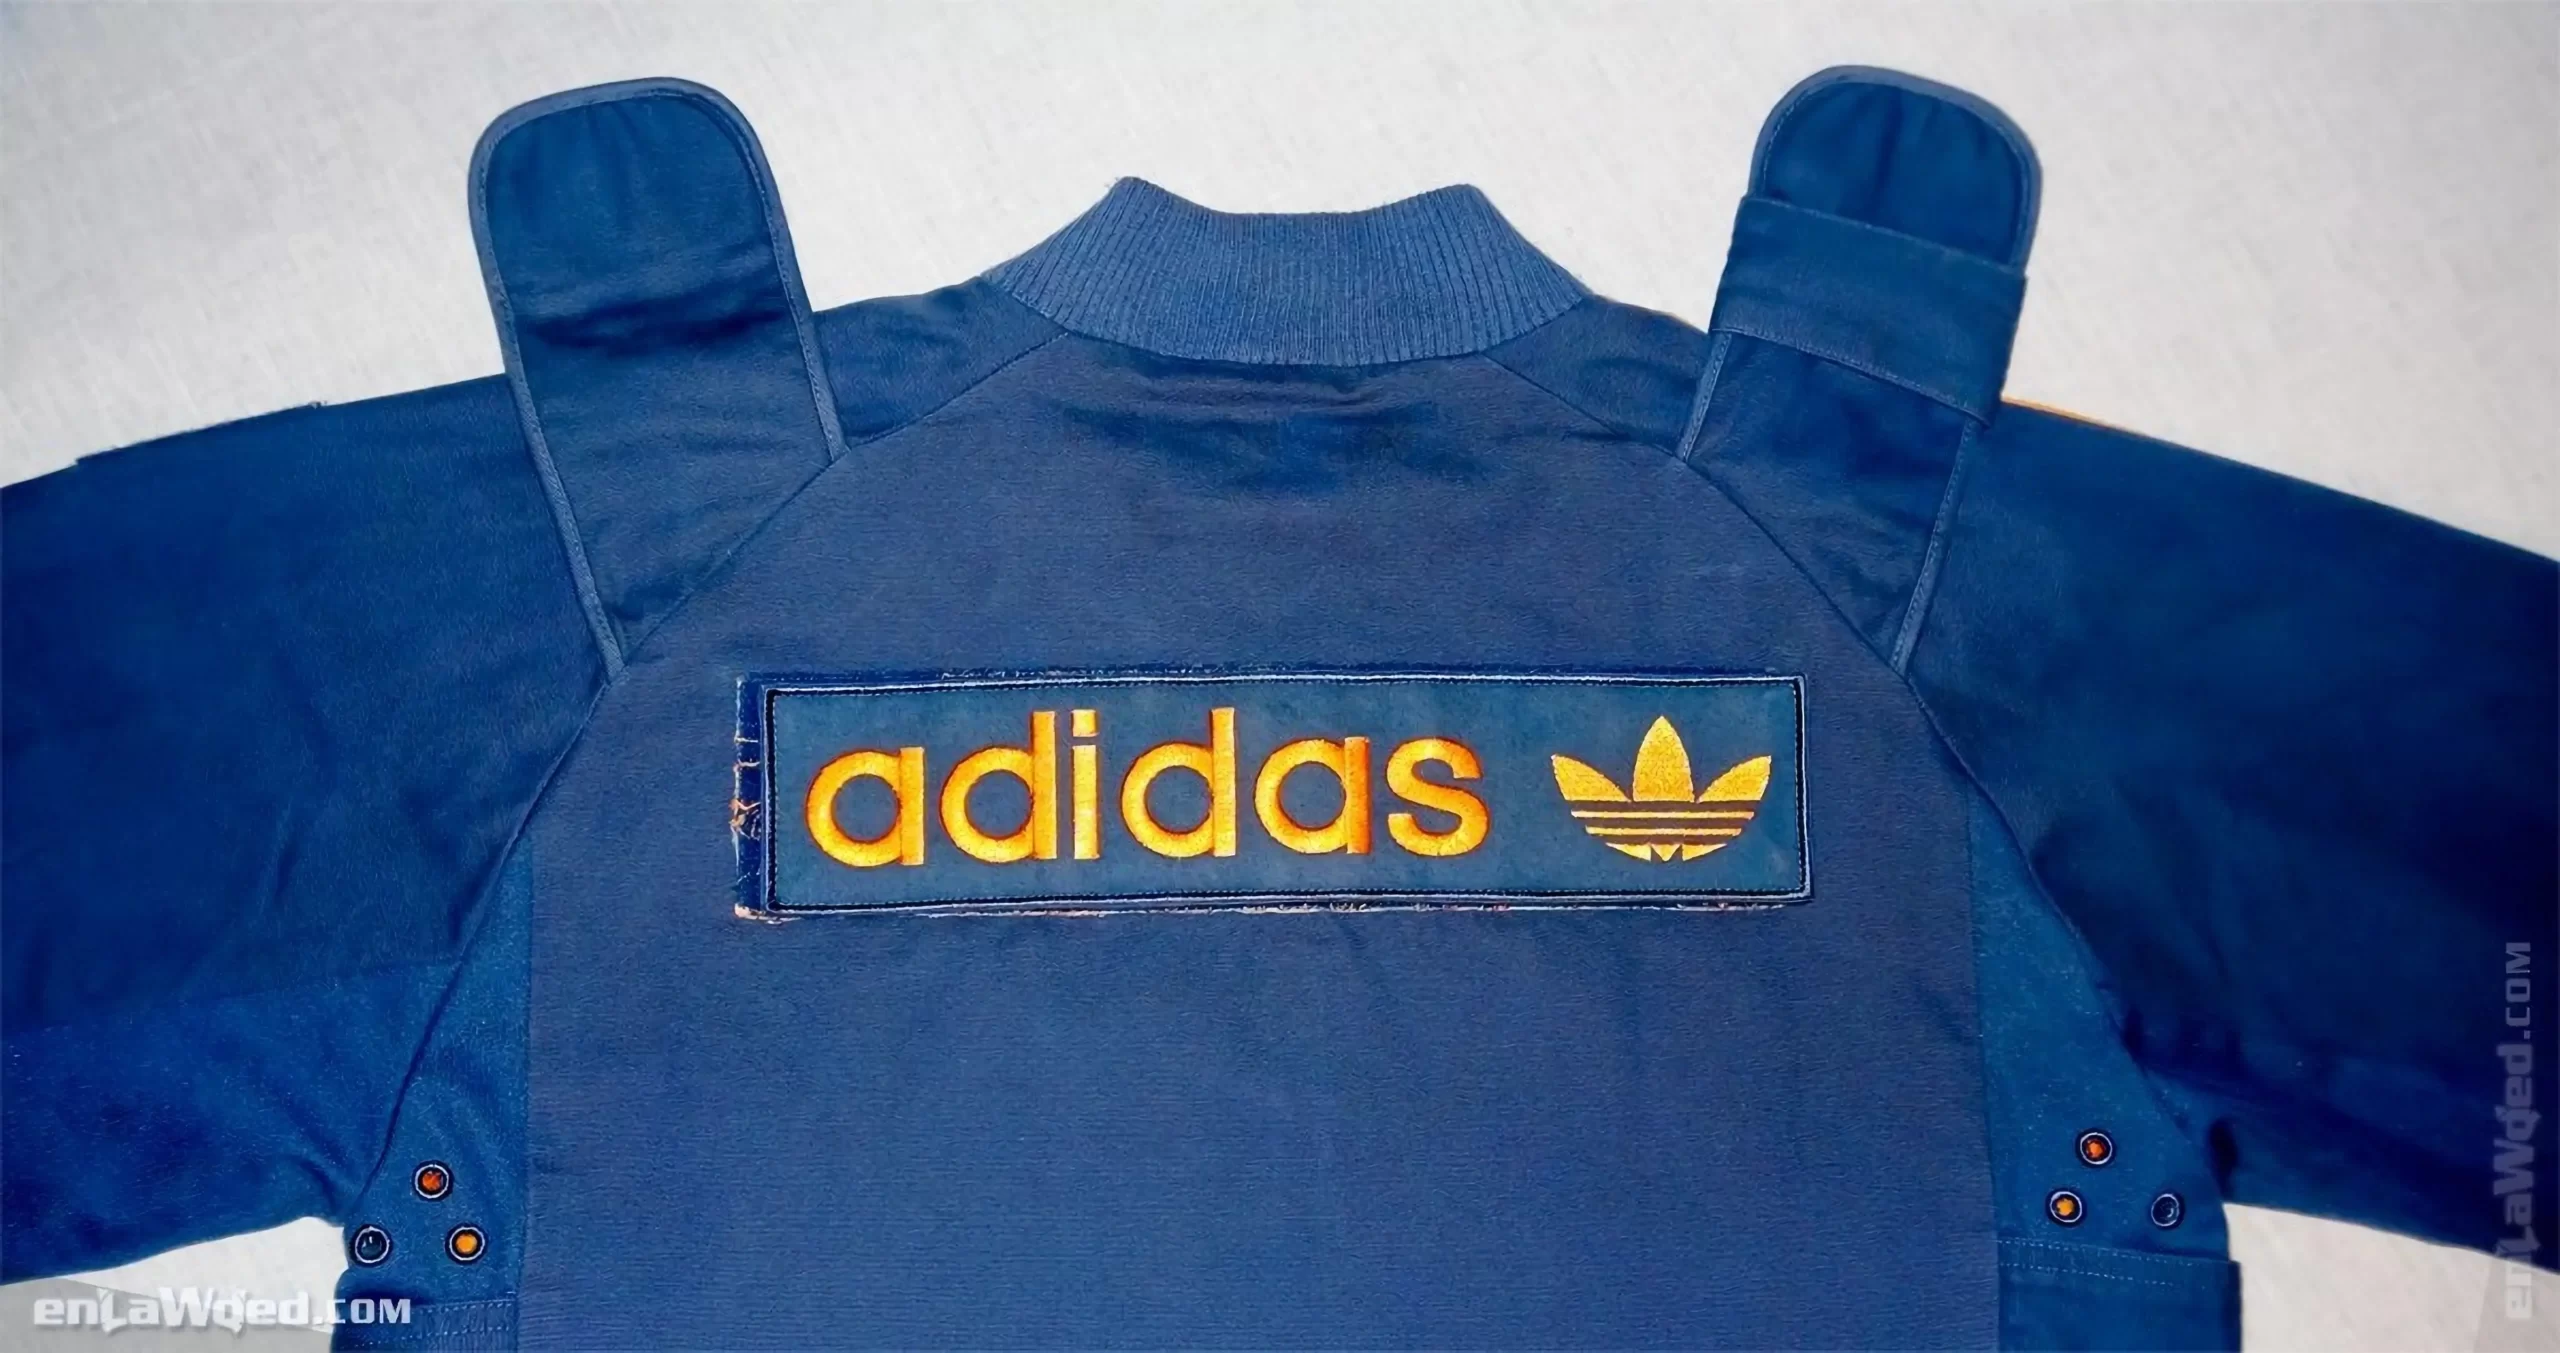 Men’s 2005 Adidas Originals Military Peace Jacket: Unstoppable (EnLawded.com file #lmchbpm5tls83xepgyl)